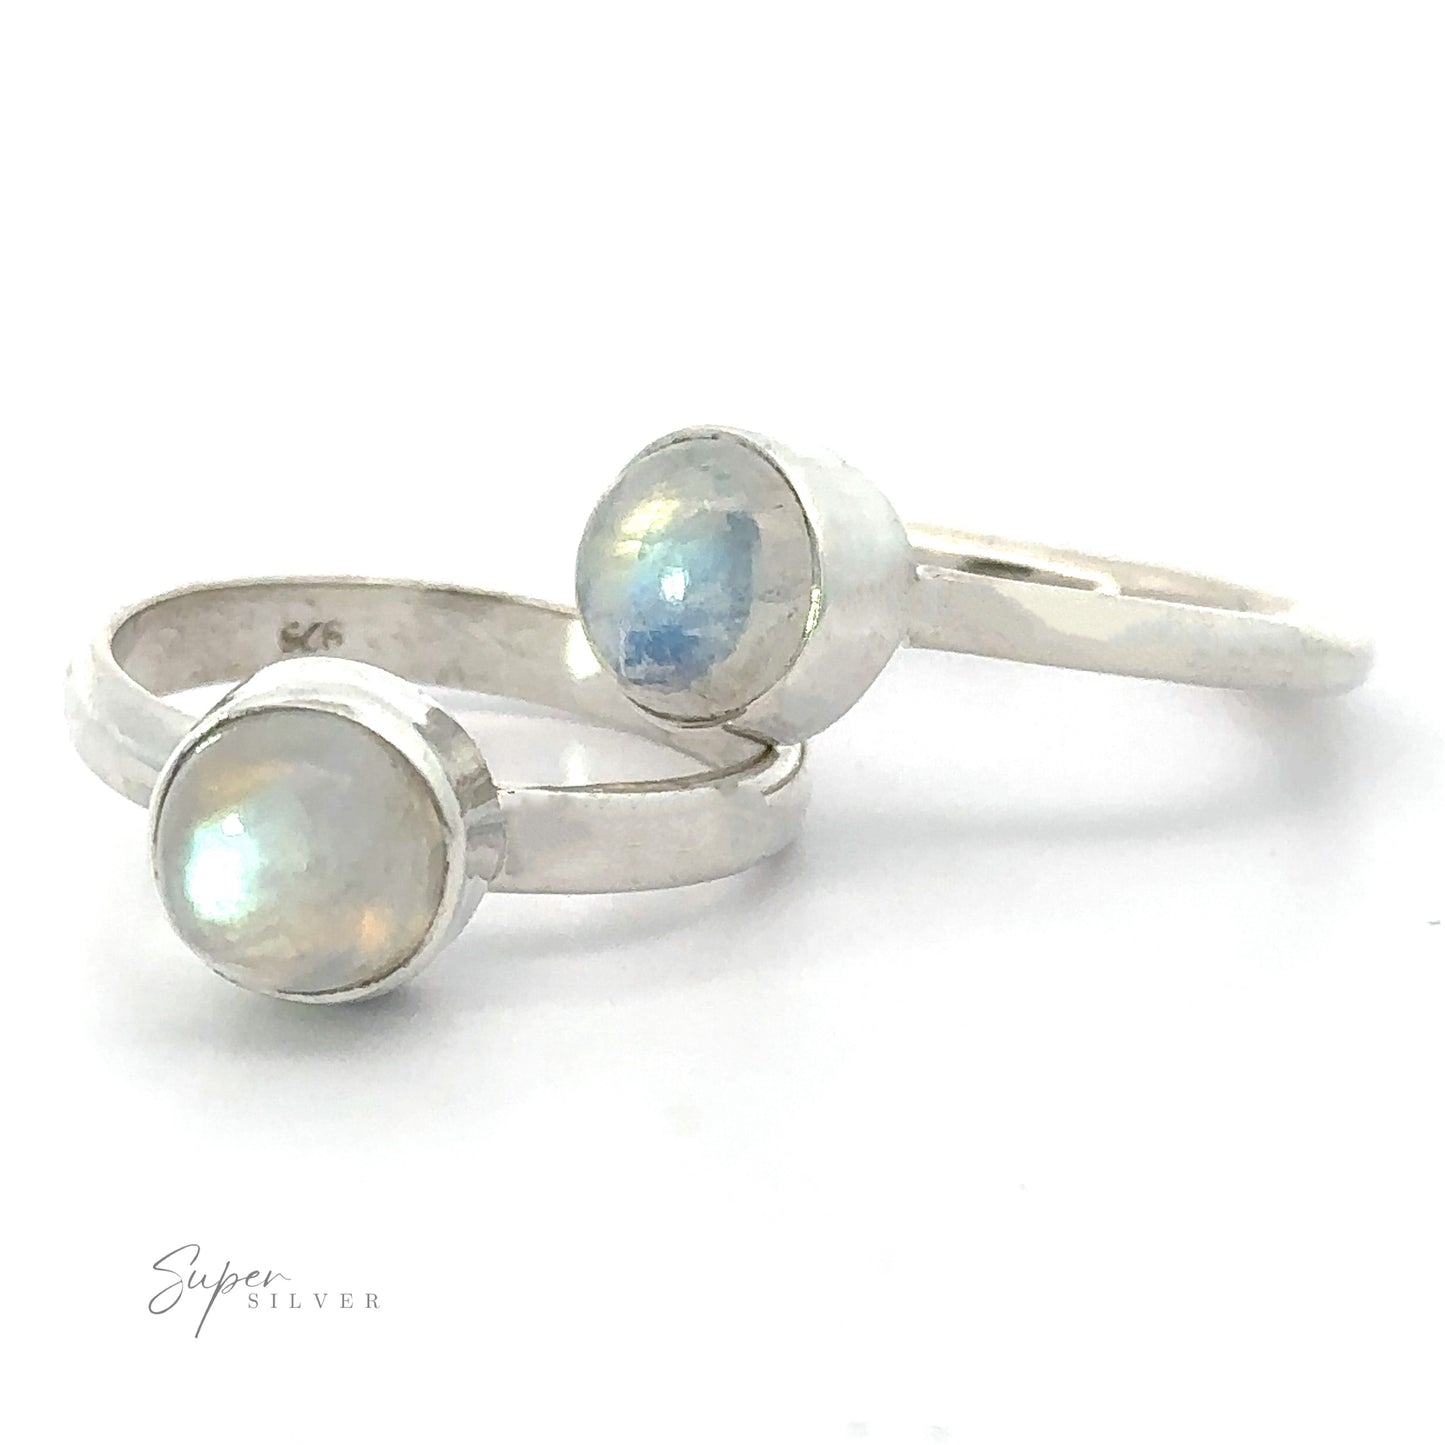 Two Round Moonstone Rings with .925 Sterling Silver bands on a white background.